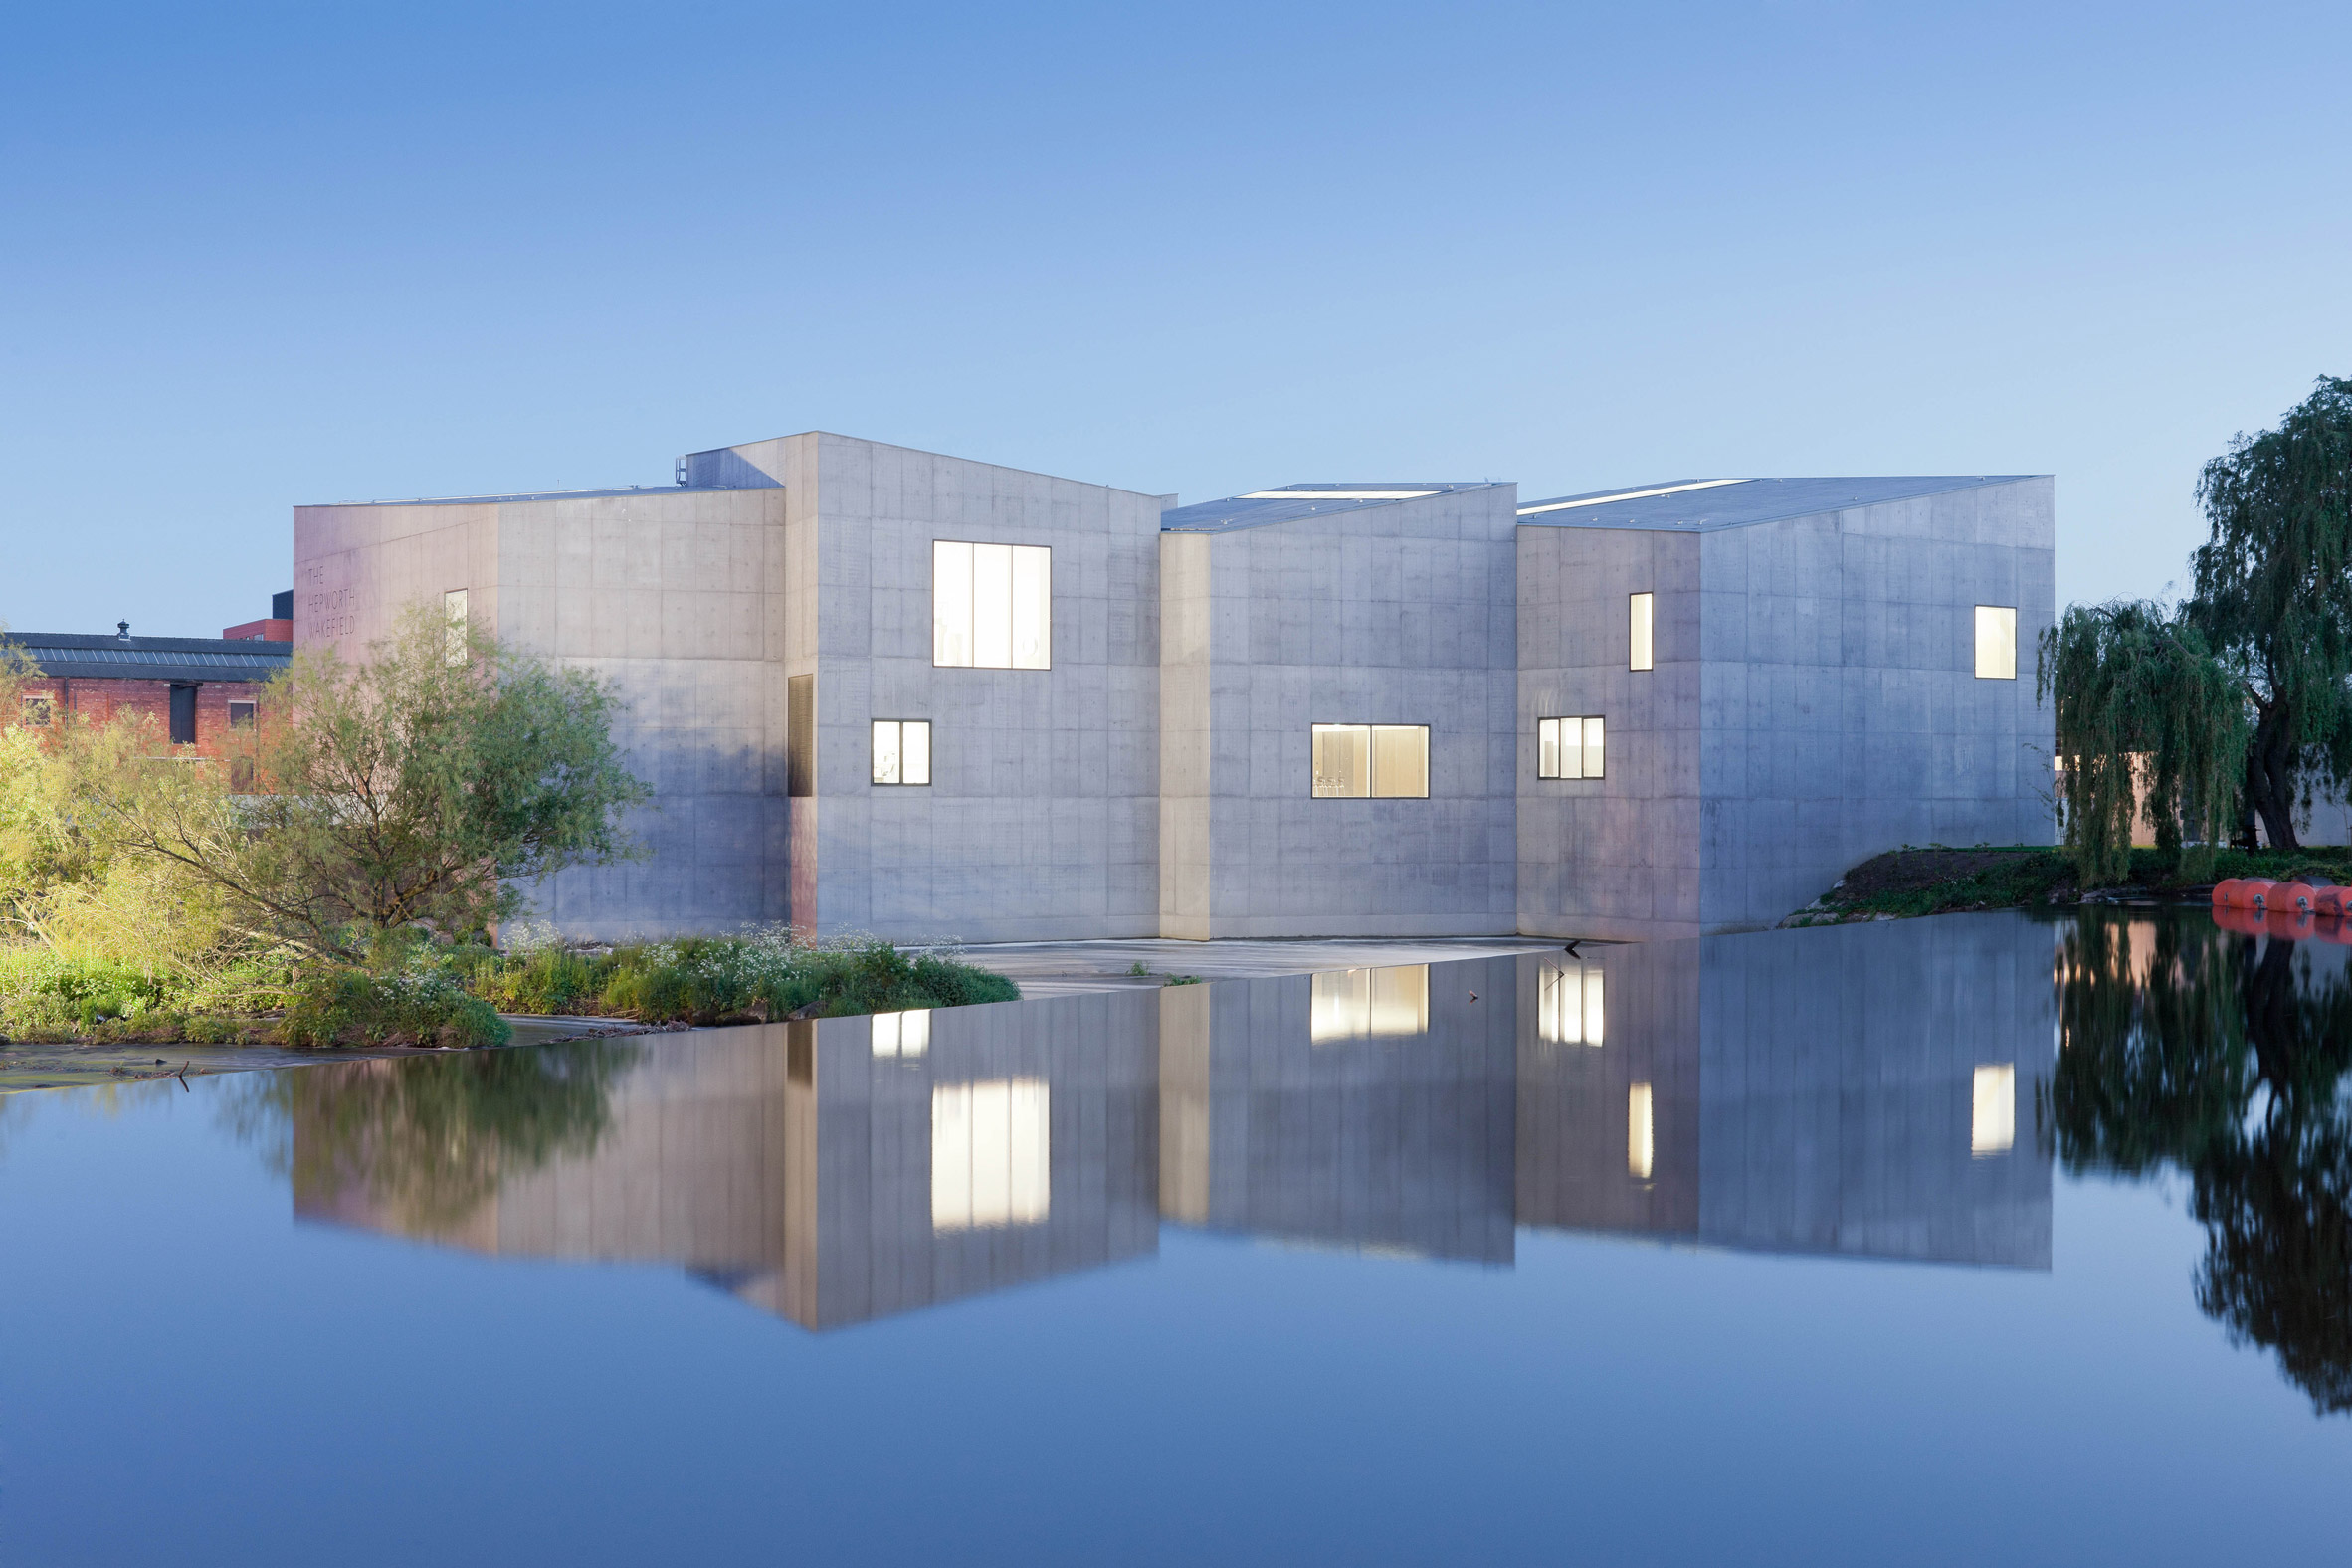 Exterior of The Hepworth gallery by David Chipperfield from across the water